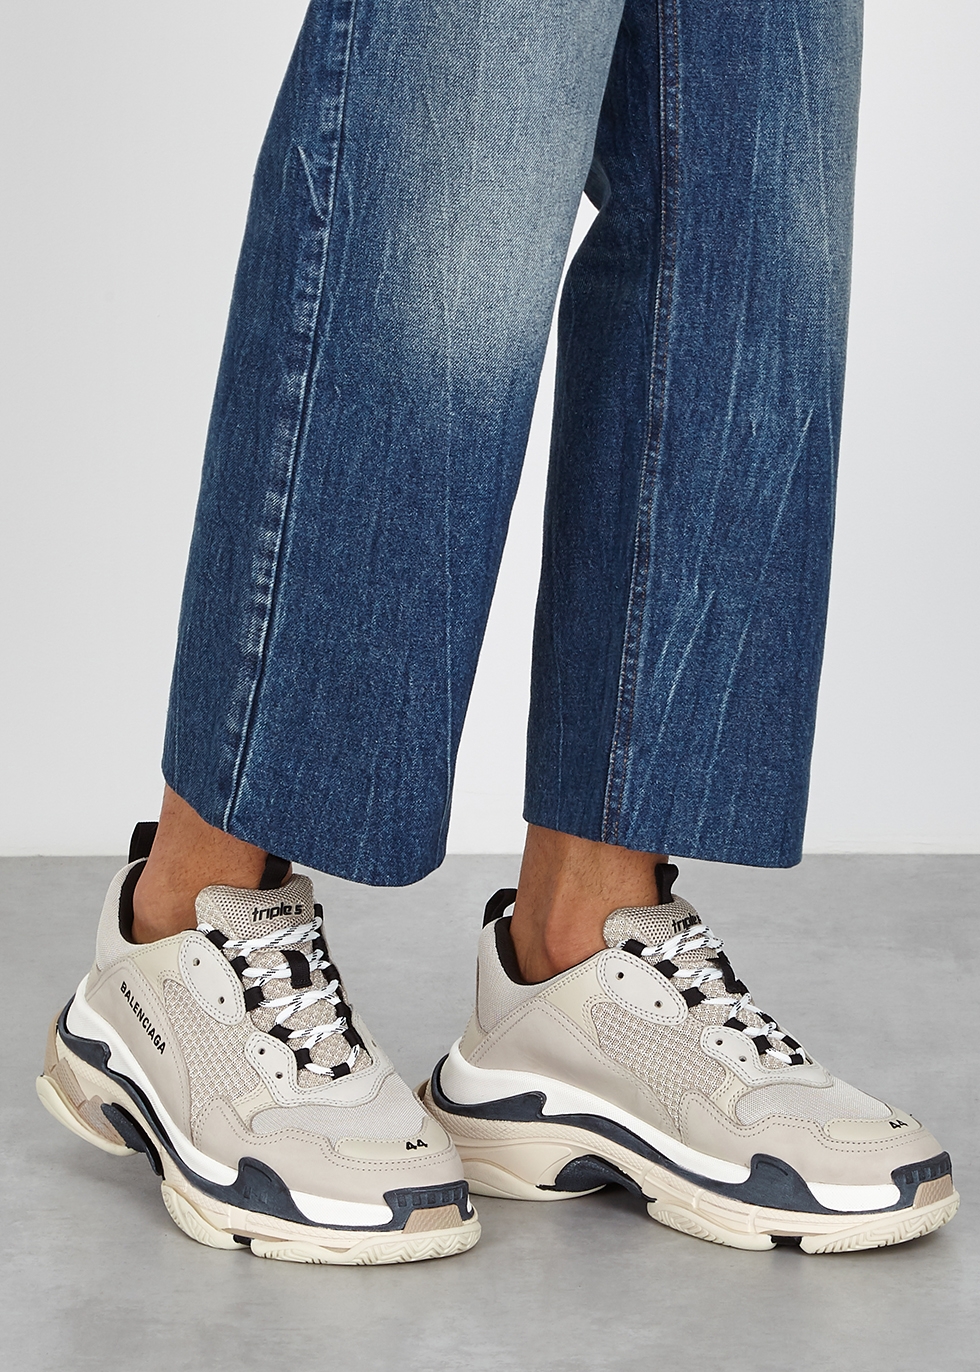 Balenciaga Triple S suede leather and mesh sneakers in